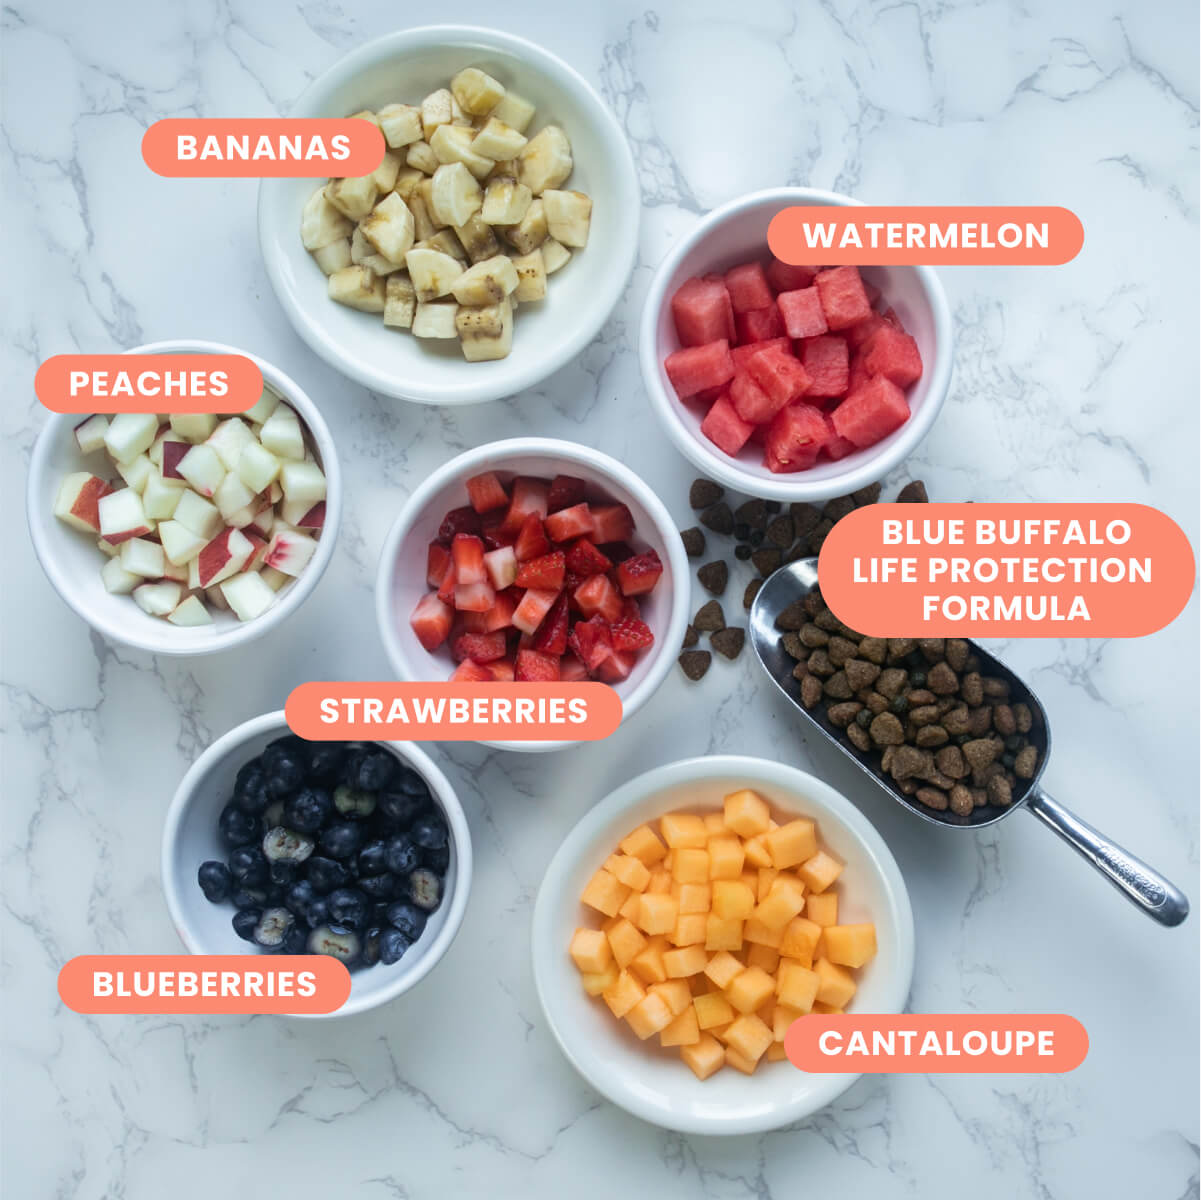 Blue Buffalo Summertime Bowl Recipe ingredients - One serving of BLUE Life Protection Formula Beef and Brown Rice Recipe, Strawberries, Watermelon, Blueberries, Cantaloupe, Bananas, Peaches kept in a bowl